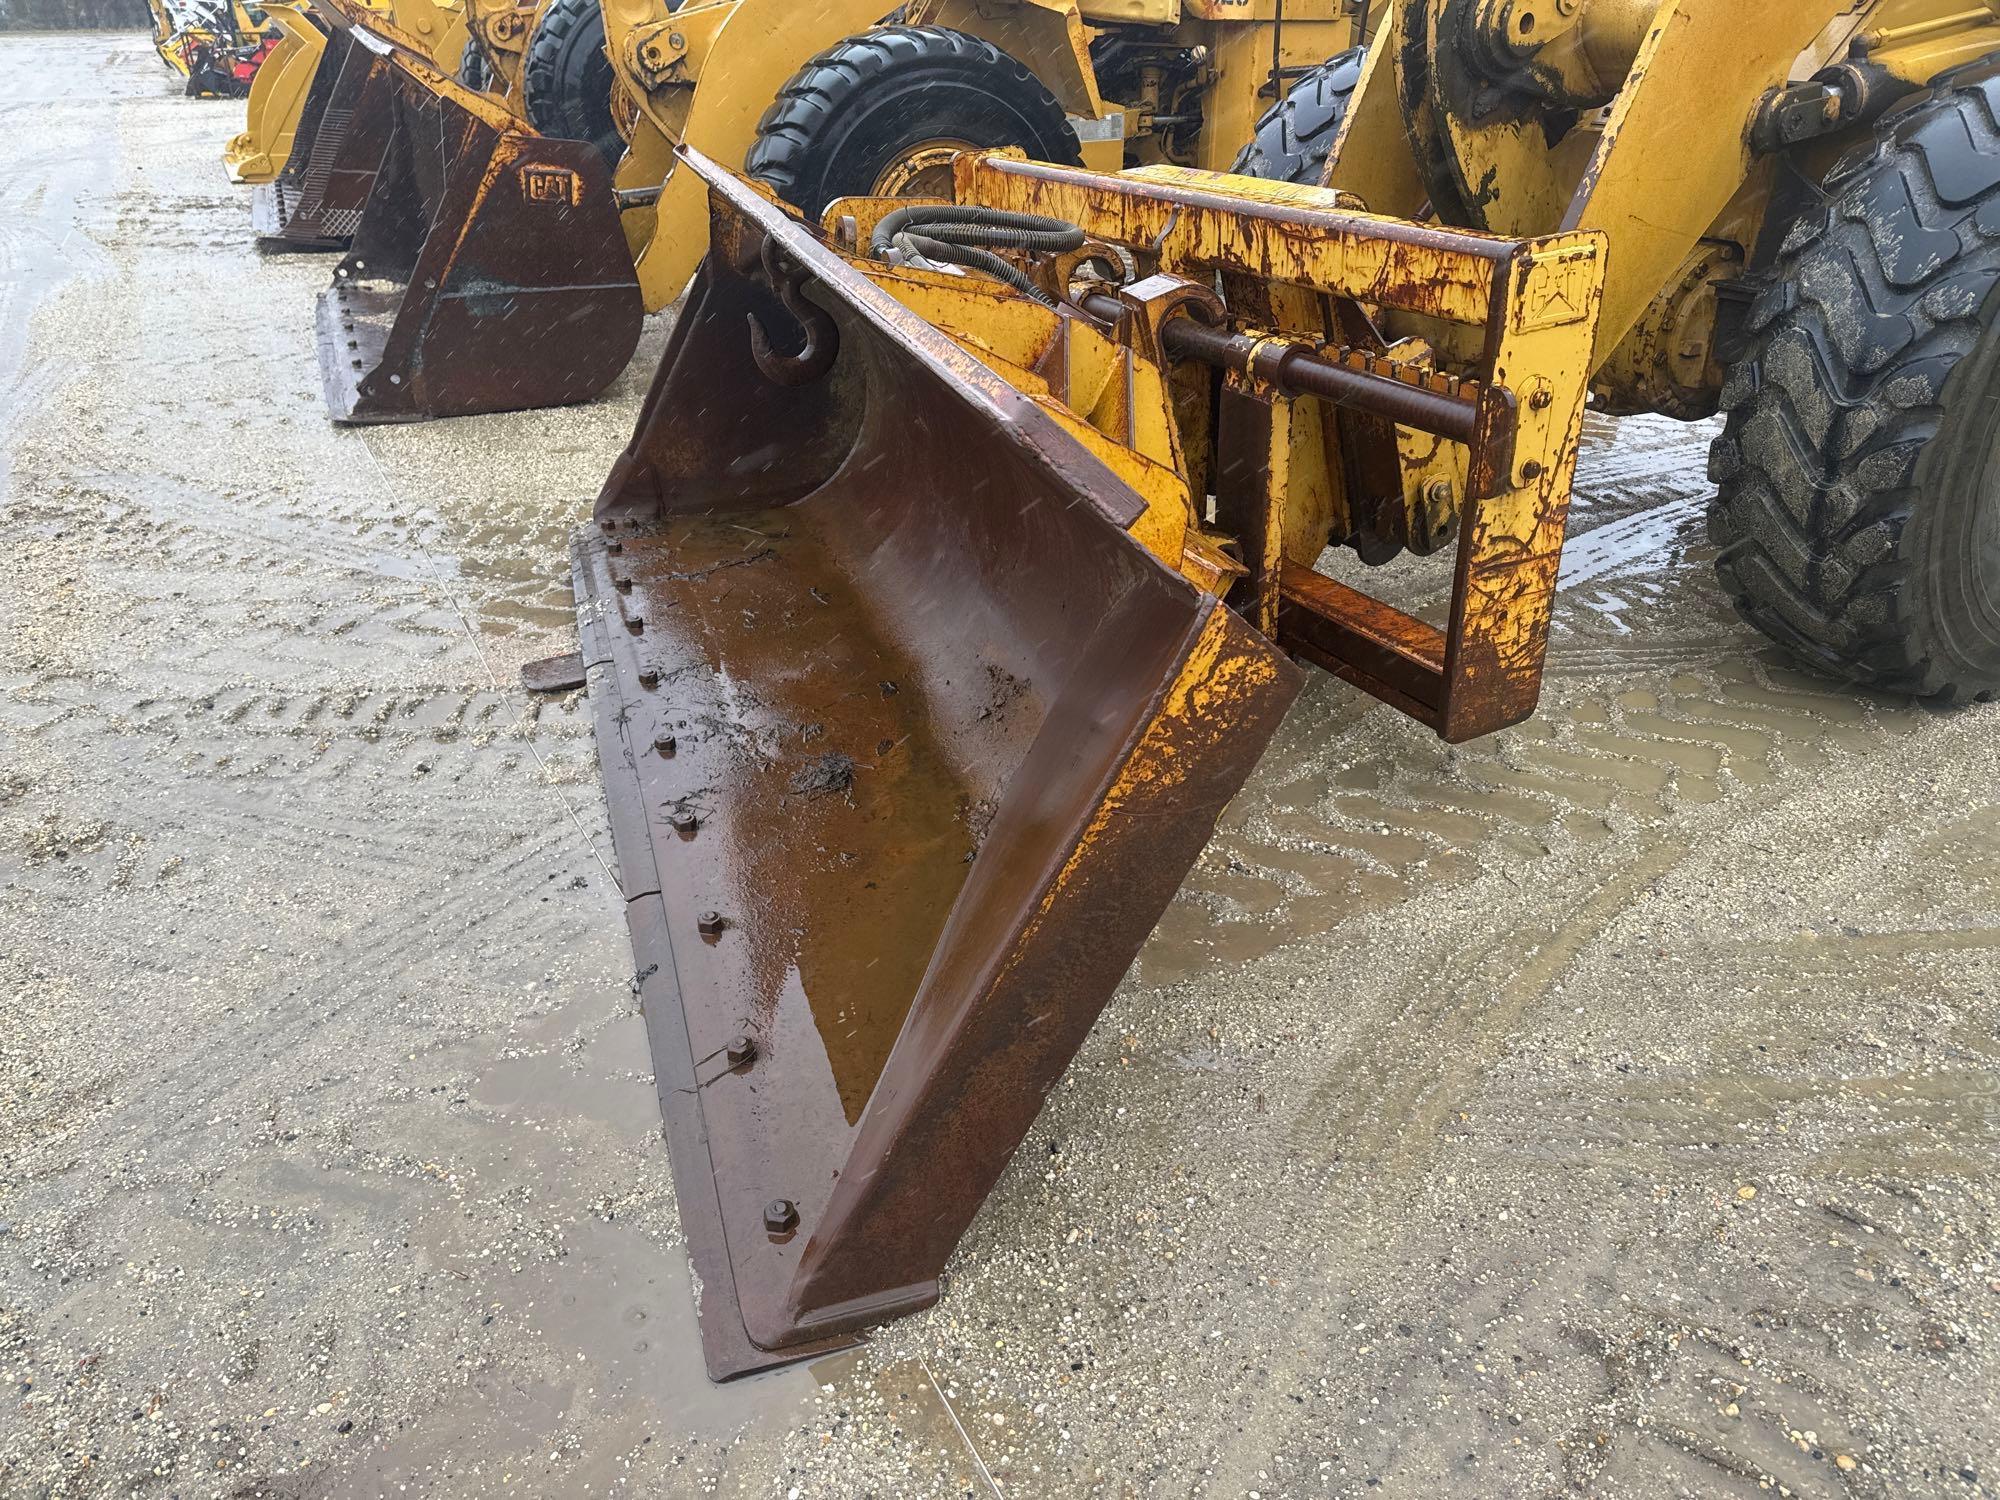 CAT 938H RUBBER TIRED LOADER SN:266 powered by Cat diesel engine, equipped with EROPS, Cat coupler,